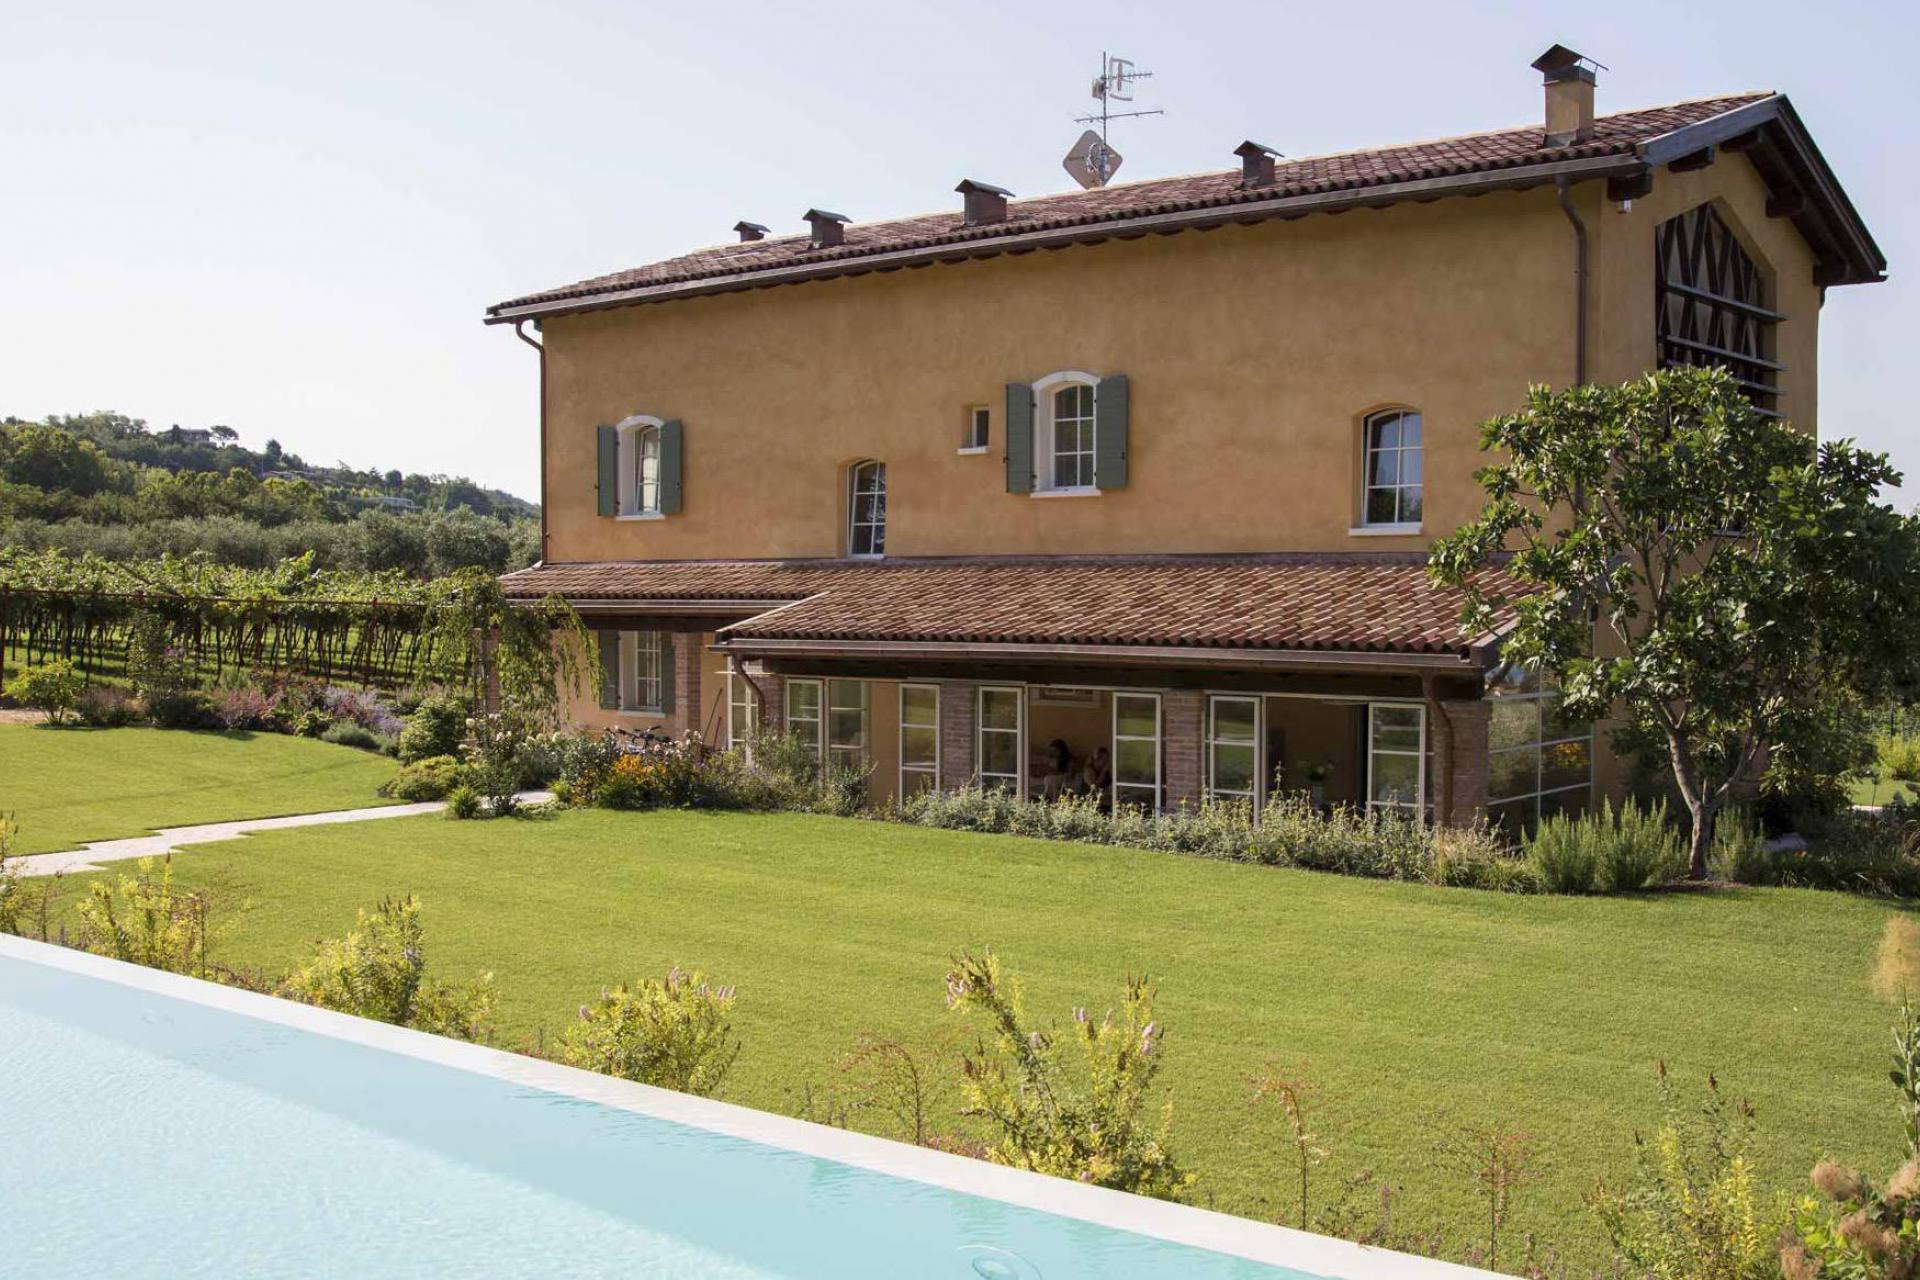 Charming agriturismo with beautiful views